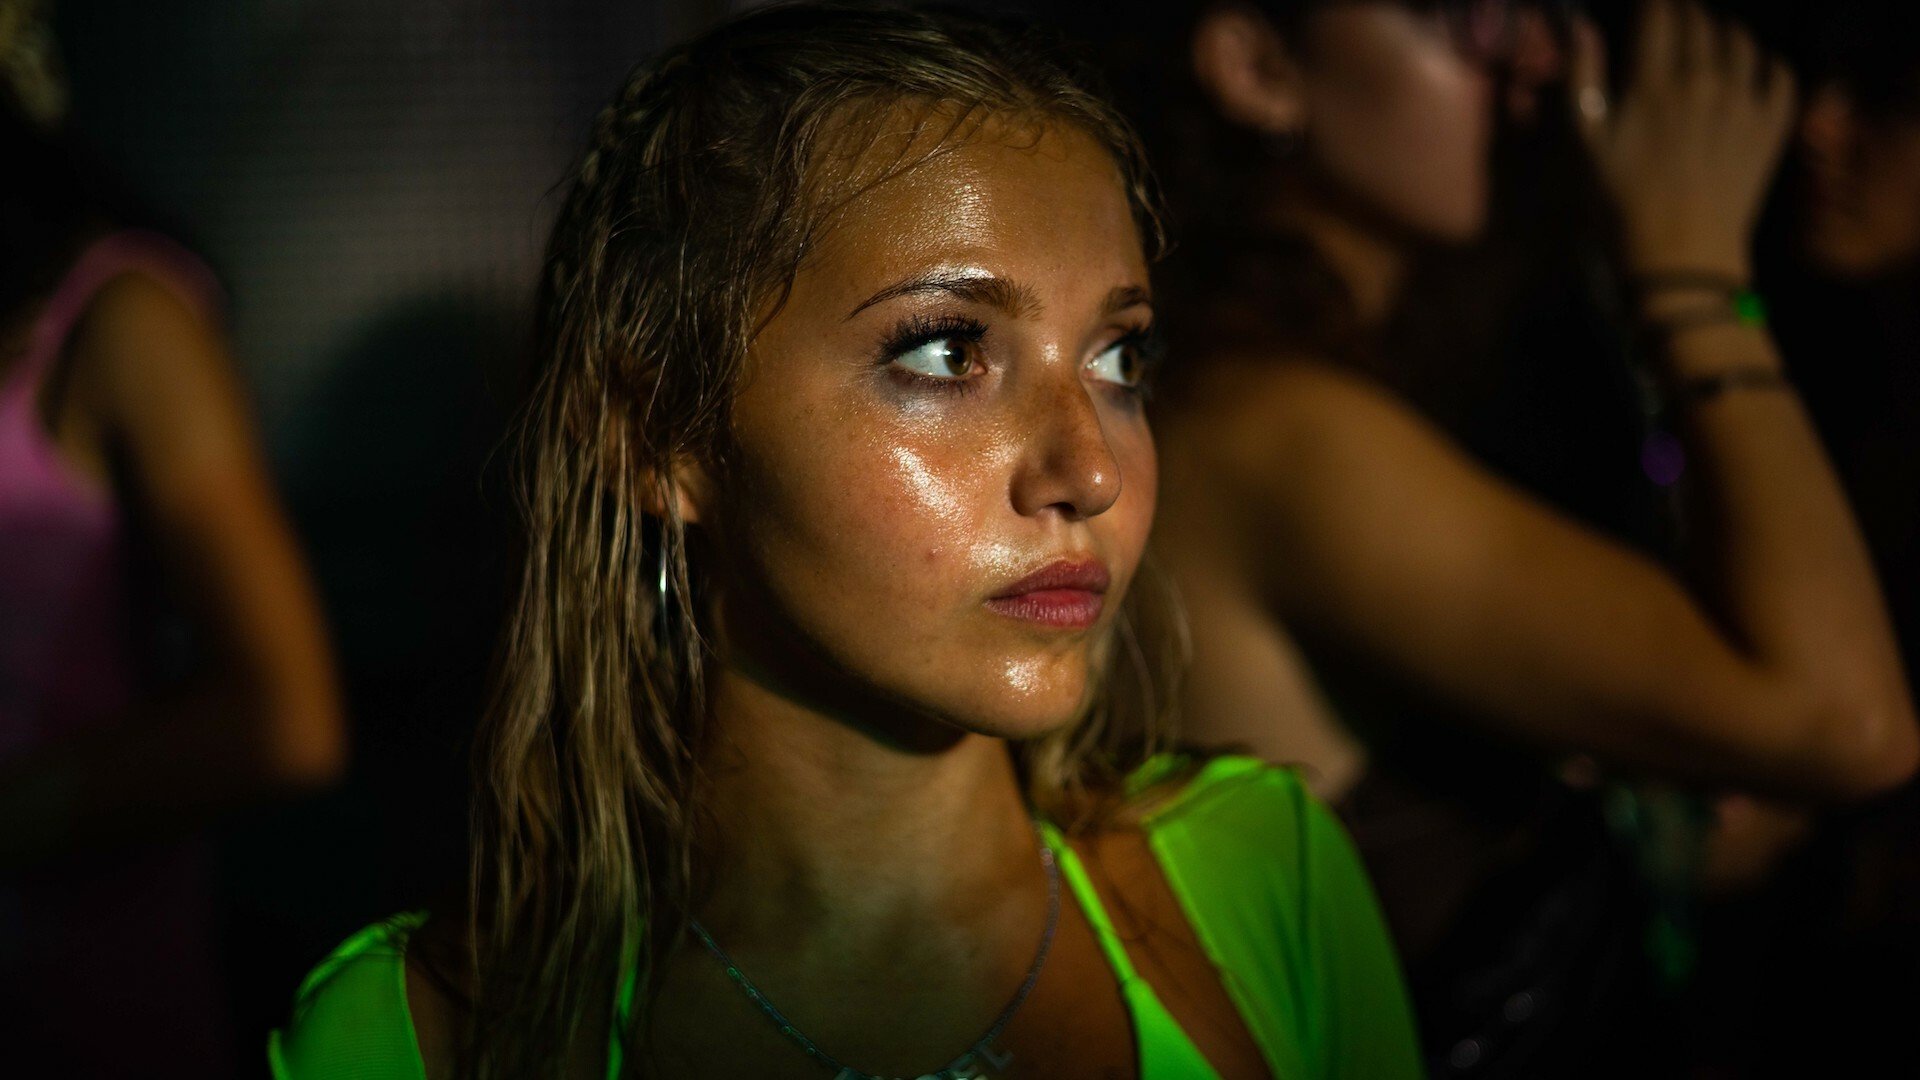 A teen girl looks deeply serious at a party.